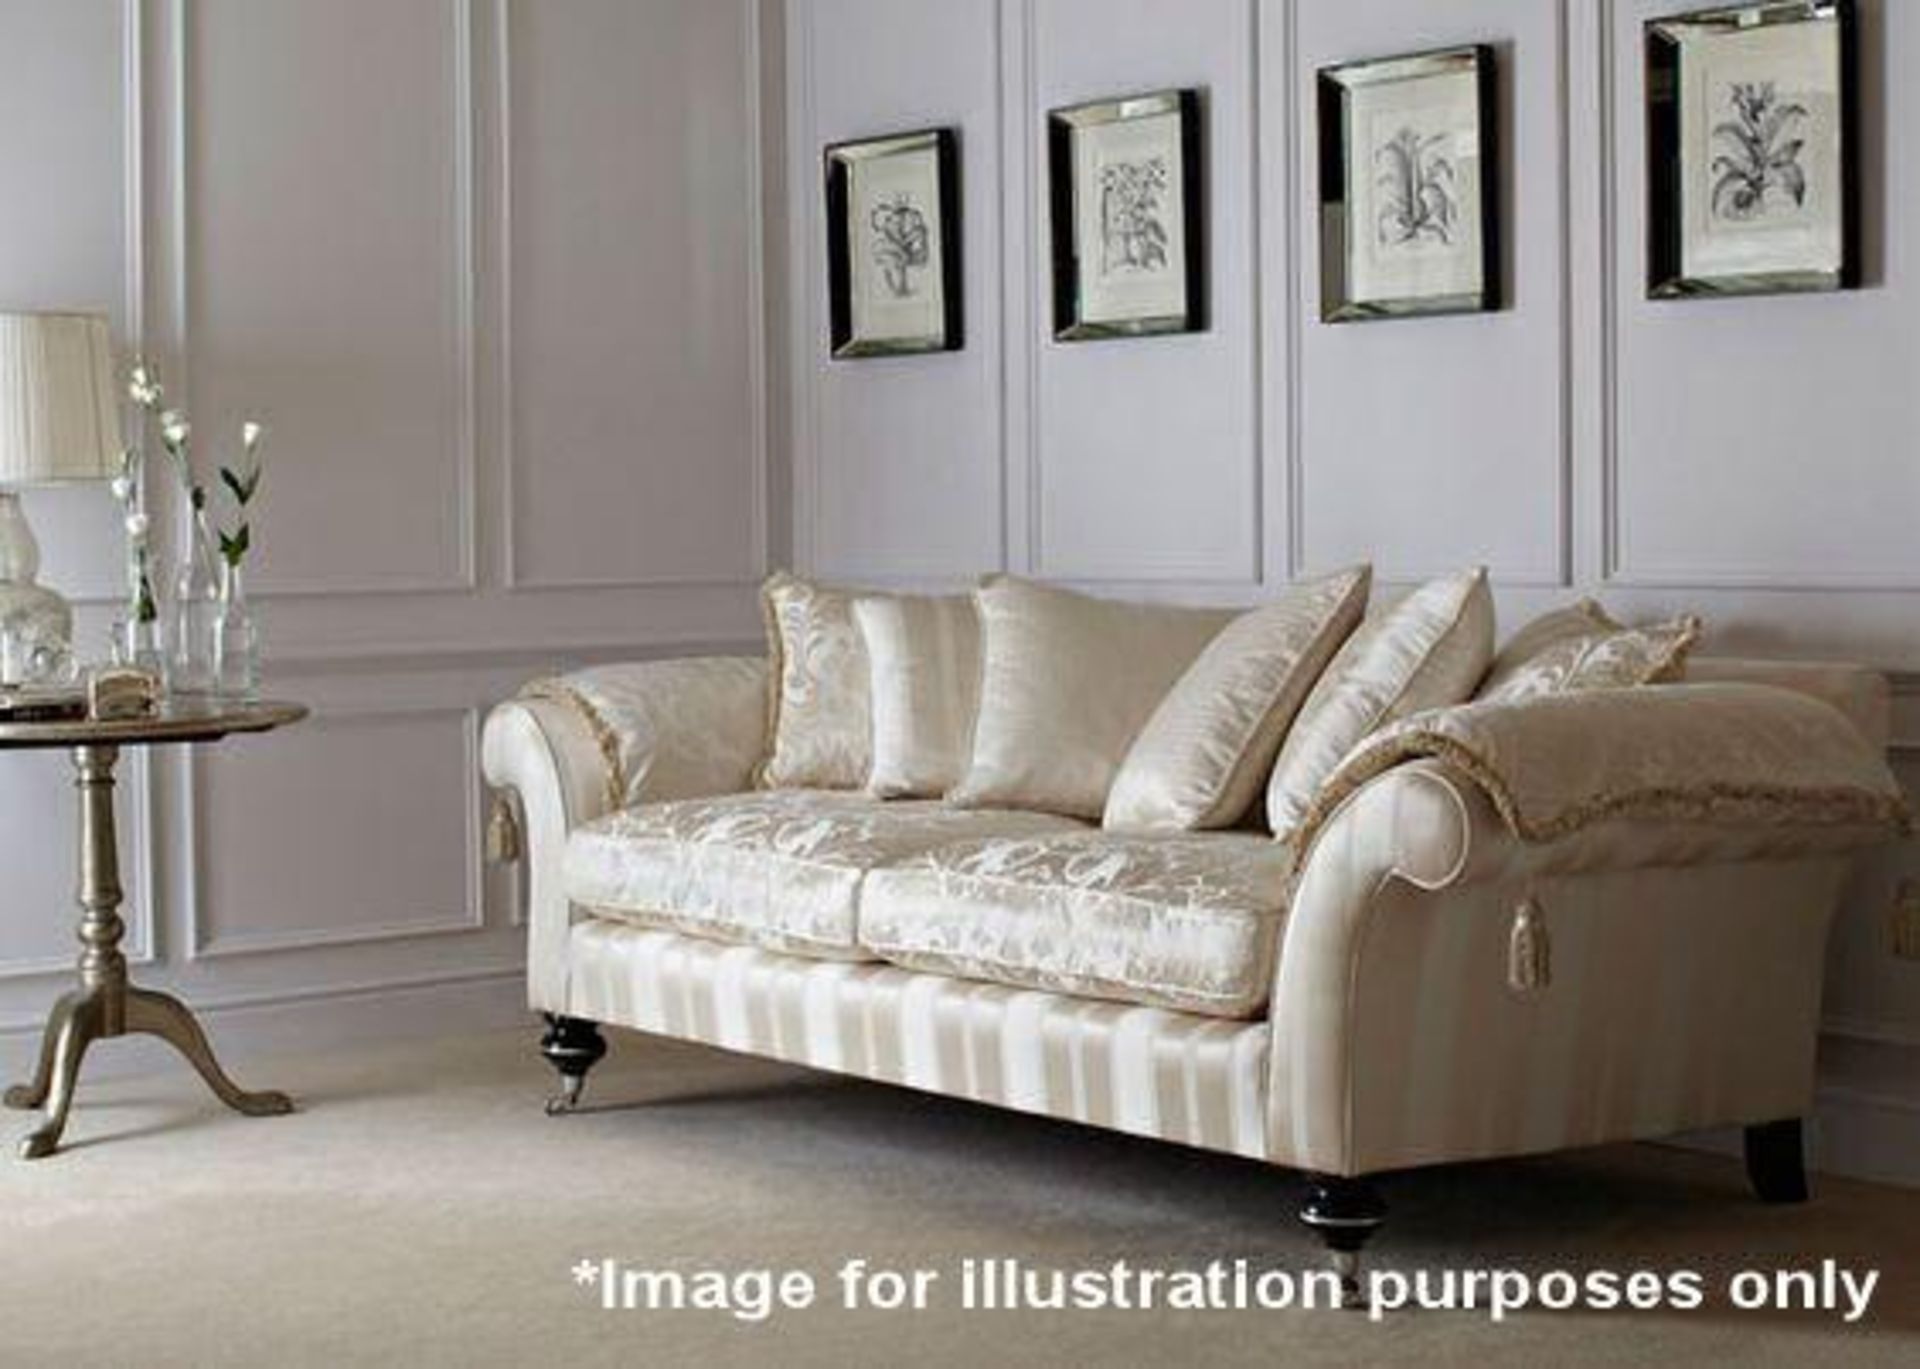 1 x Parker & Farr Clive 3 Seater Sofa - Dimensions: 260 x D105 x 80cm, Seat Height 45cm - Ref: 30663 - Image 3 of 24